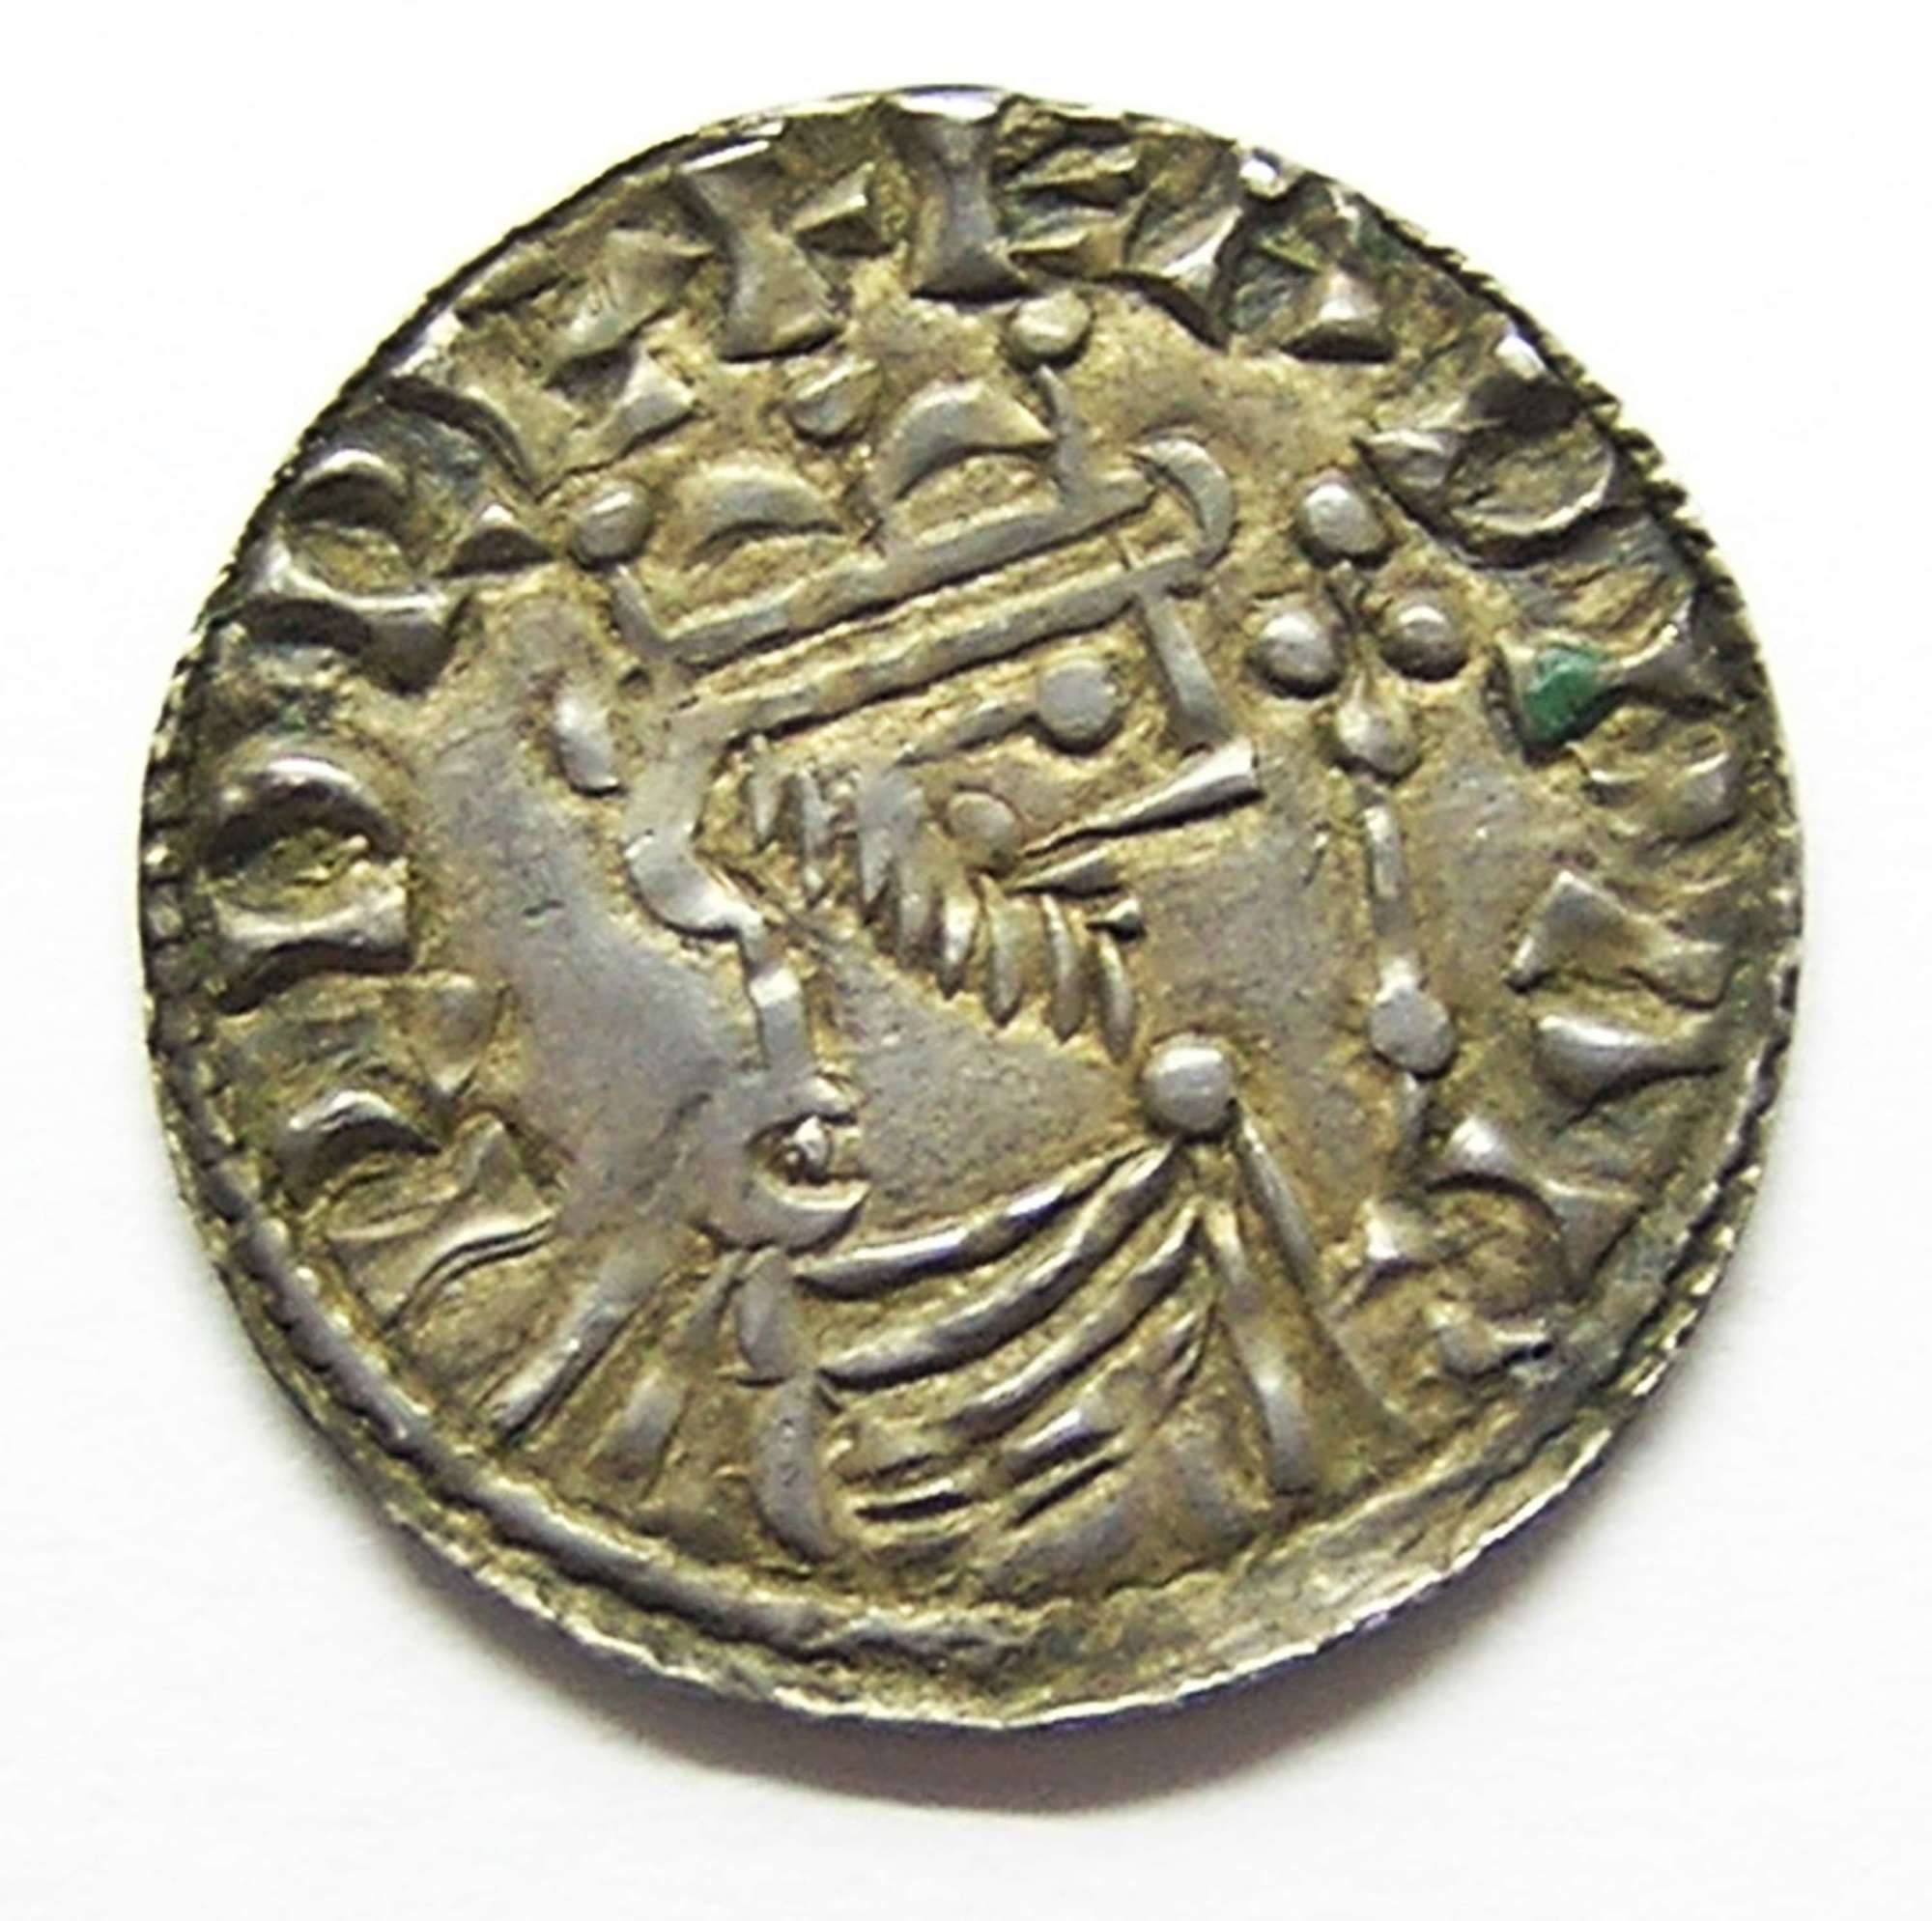 Anglo Saxon King Edward the Confessor silver penny